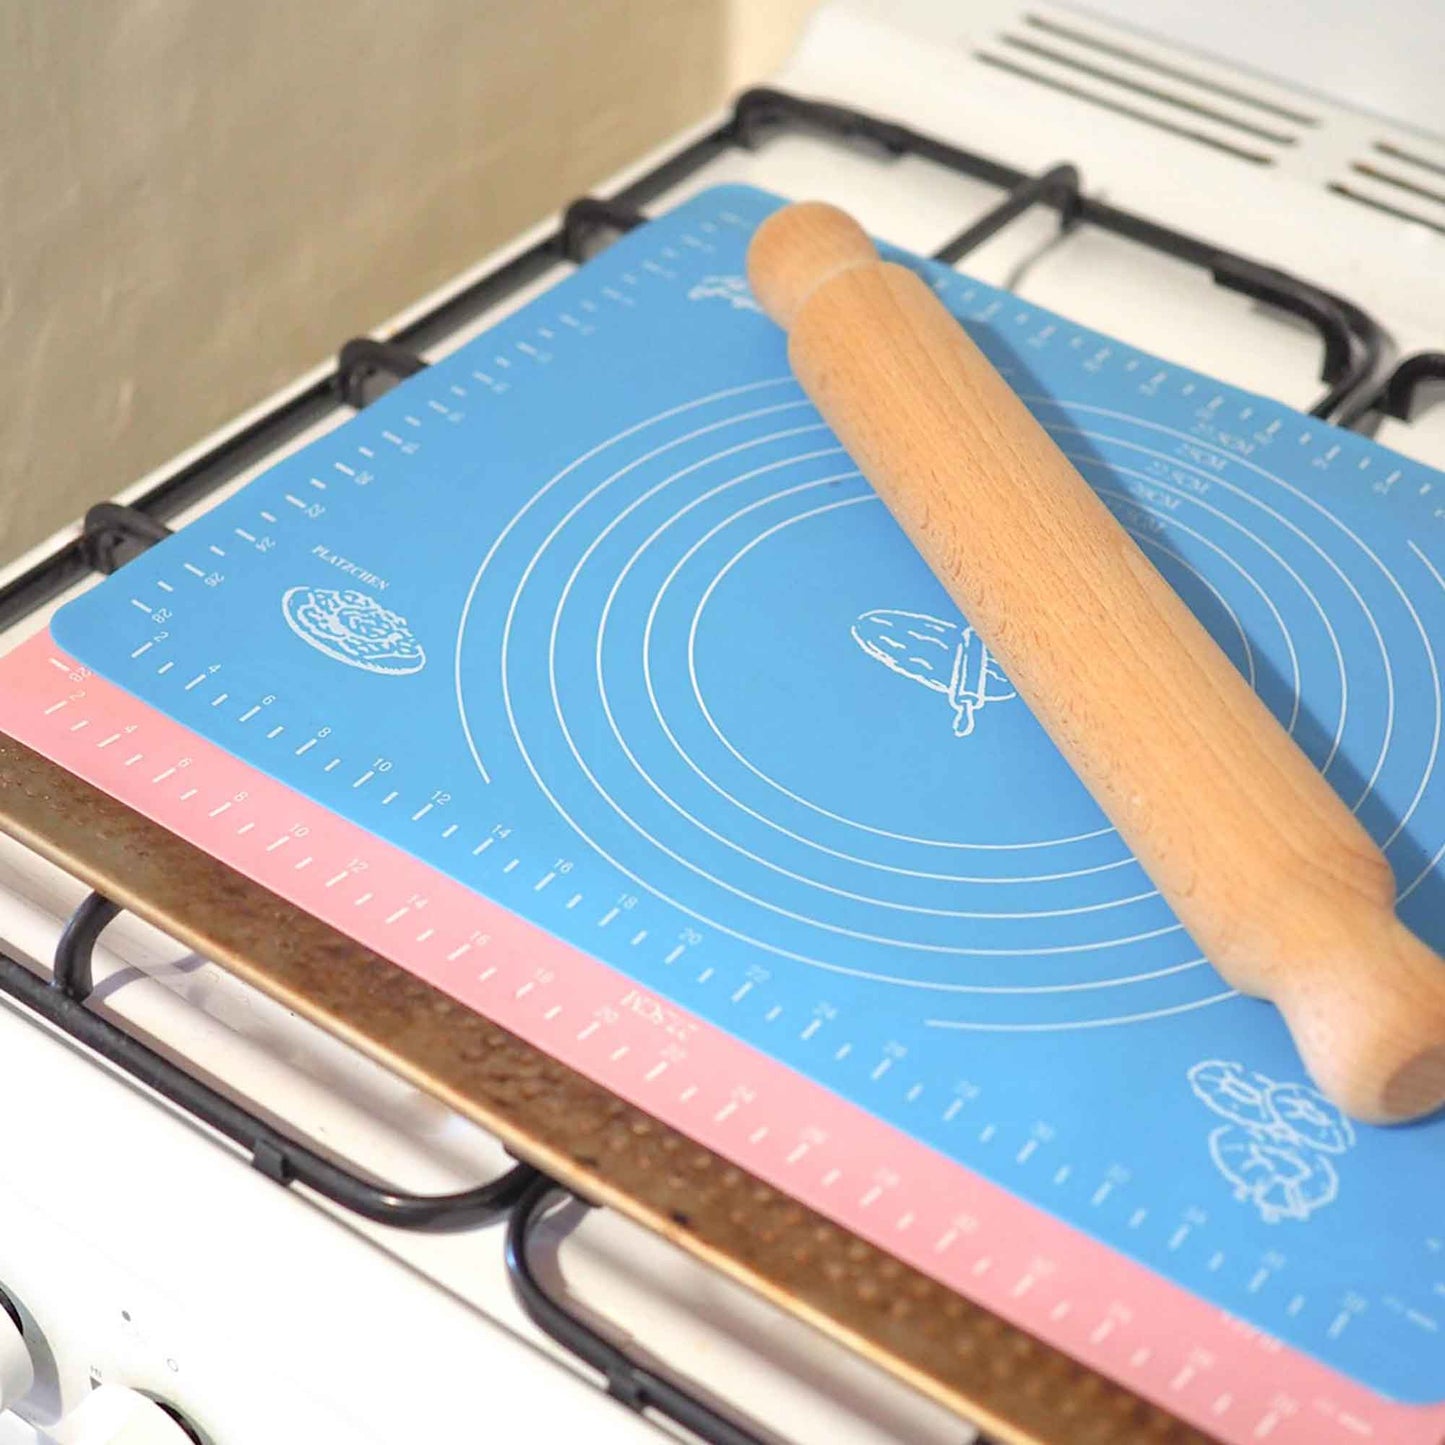 Blue and pink eco-friendly silicone baking matts with rolling pin on top